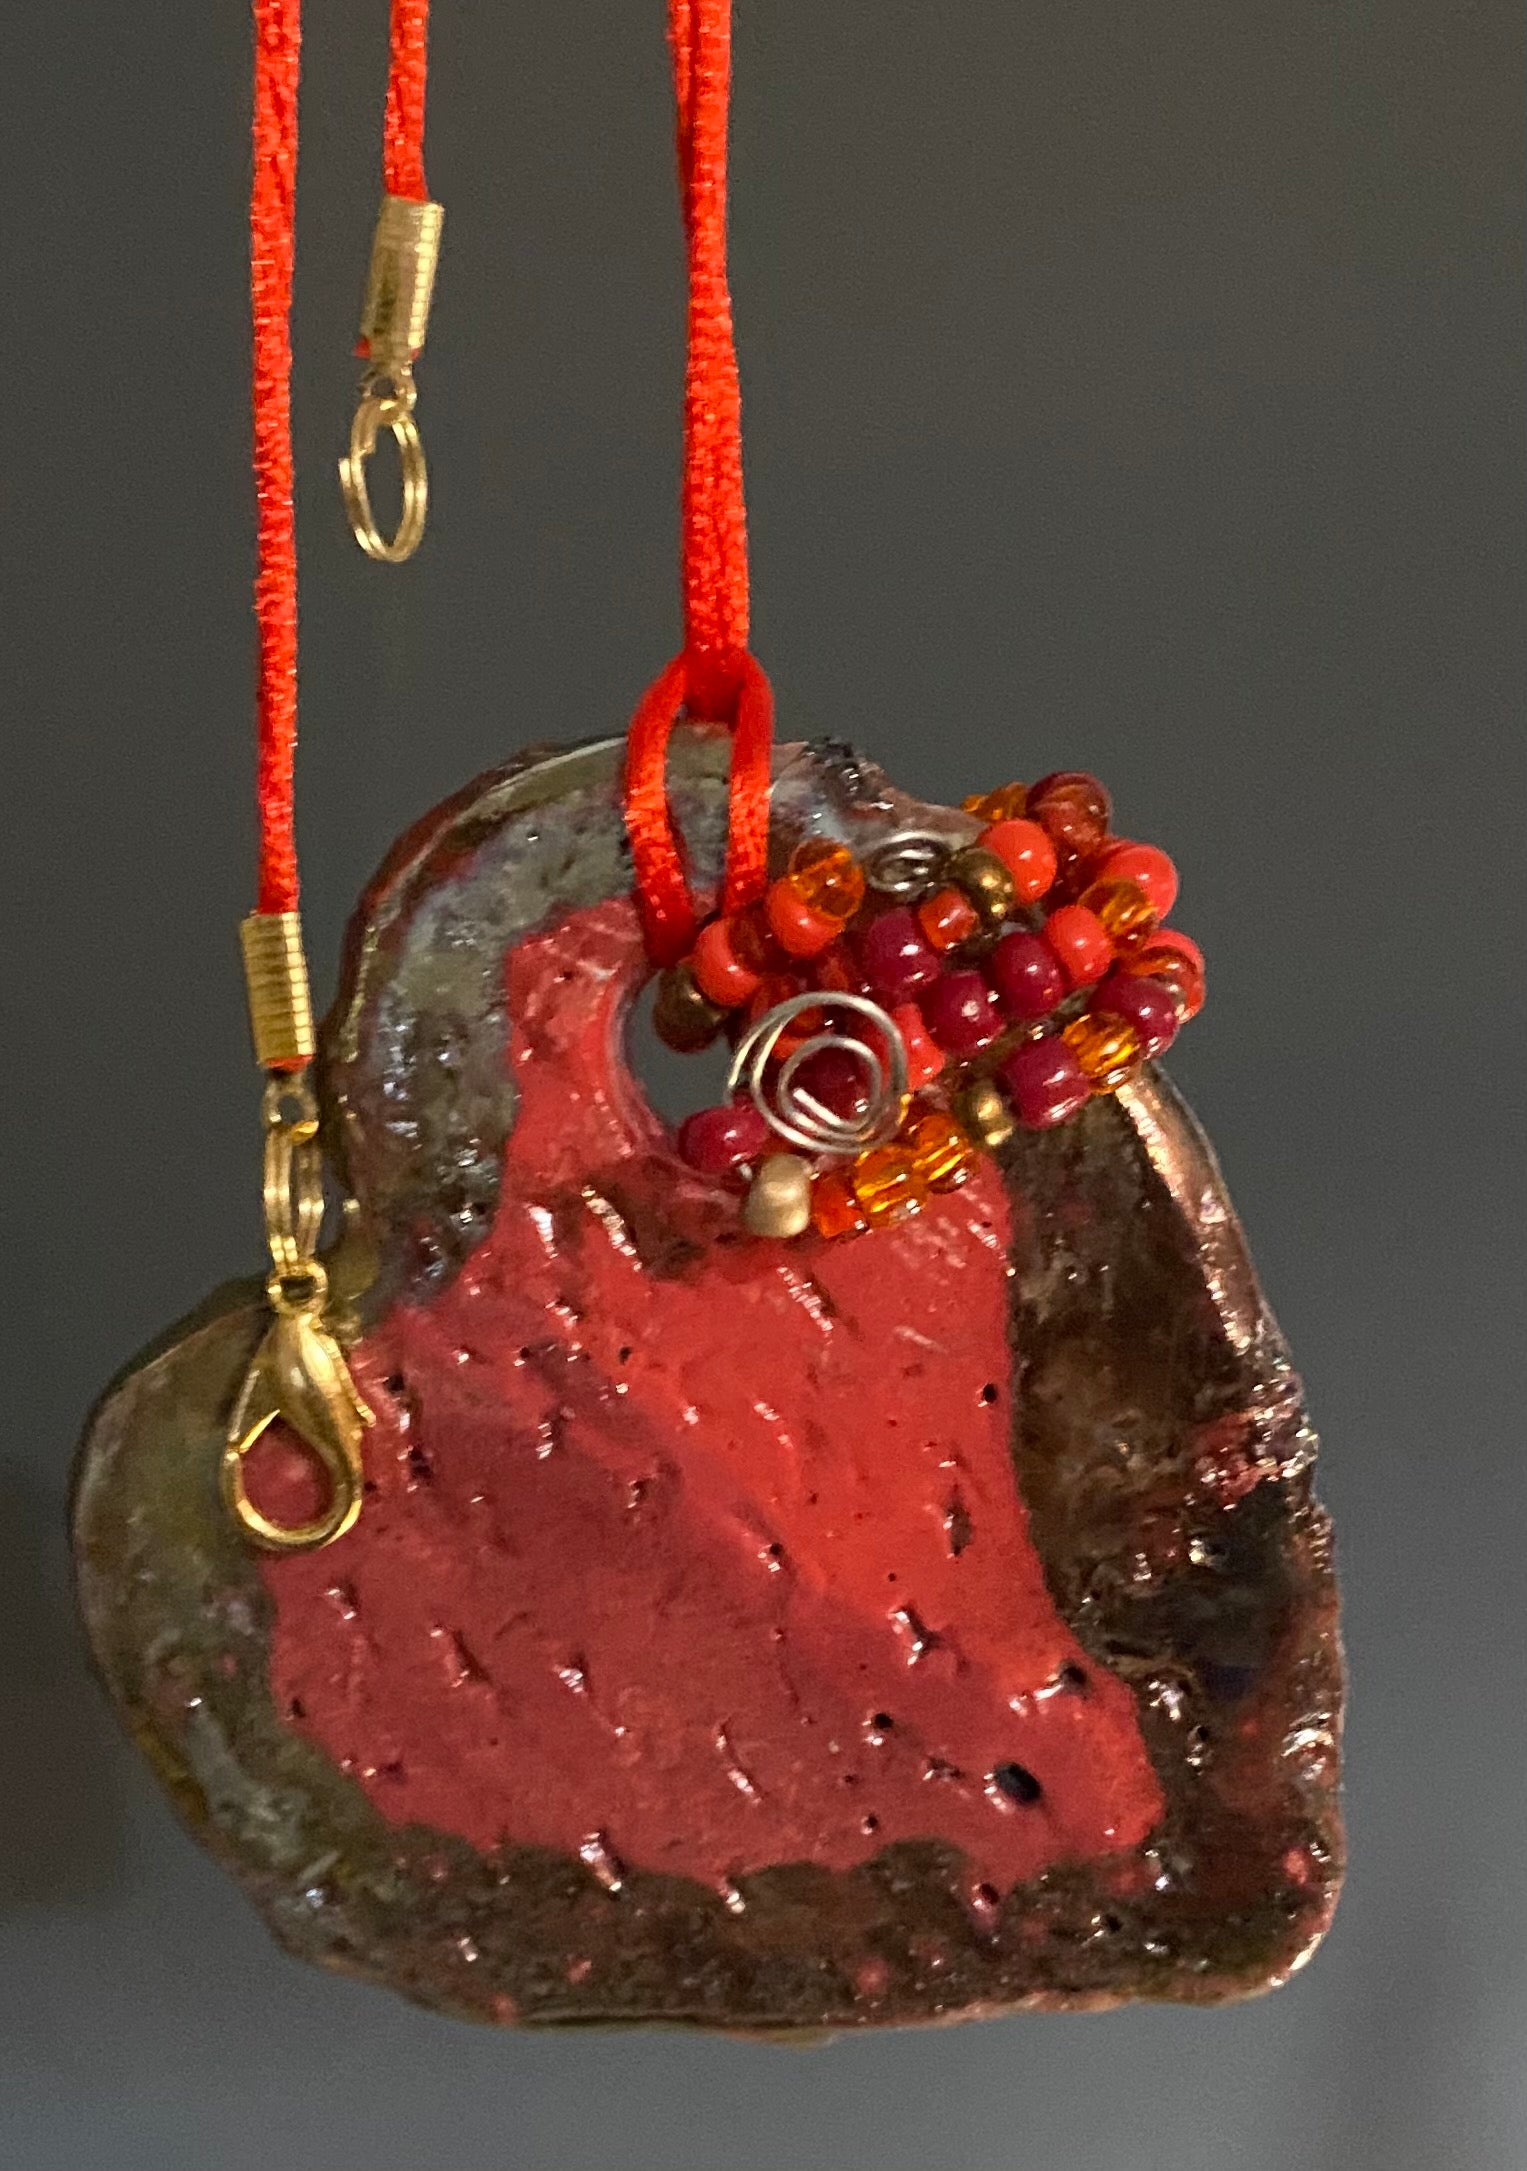 Have A Heart! Each heart pendant is handmade with love! It is 3"x 3" and weighs approx. 3ozs. This pendant has a red violet and gold metallic raku glazes that renders a unique translucent  patina. The heart has a textured pattern . Both sides are  are different and equally beautiful! It holds a spiral of red mini beads on a spiral copper wire. This pendant has a nice 12" red rattail cord!